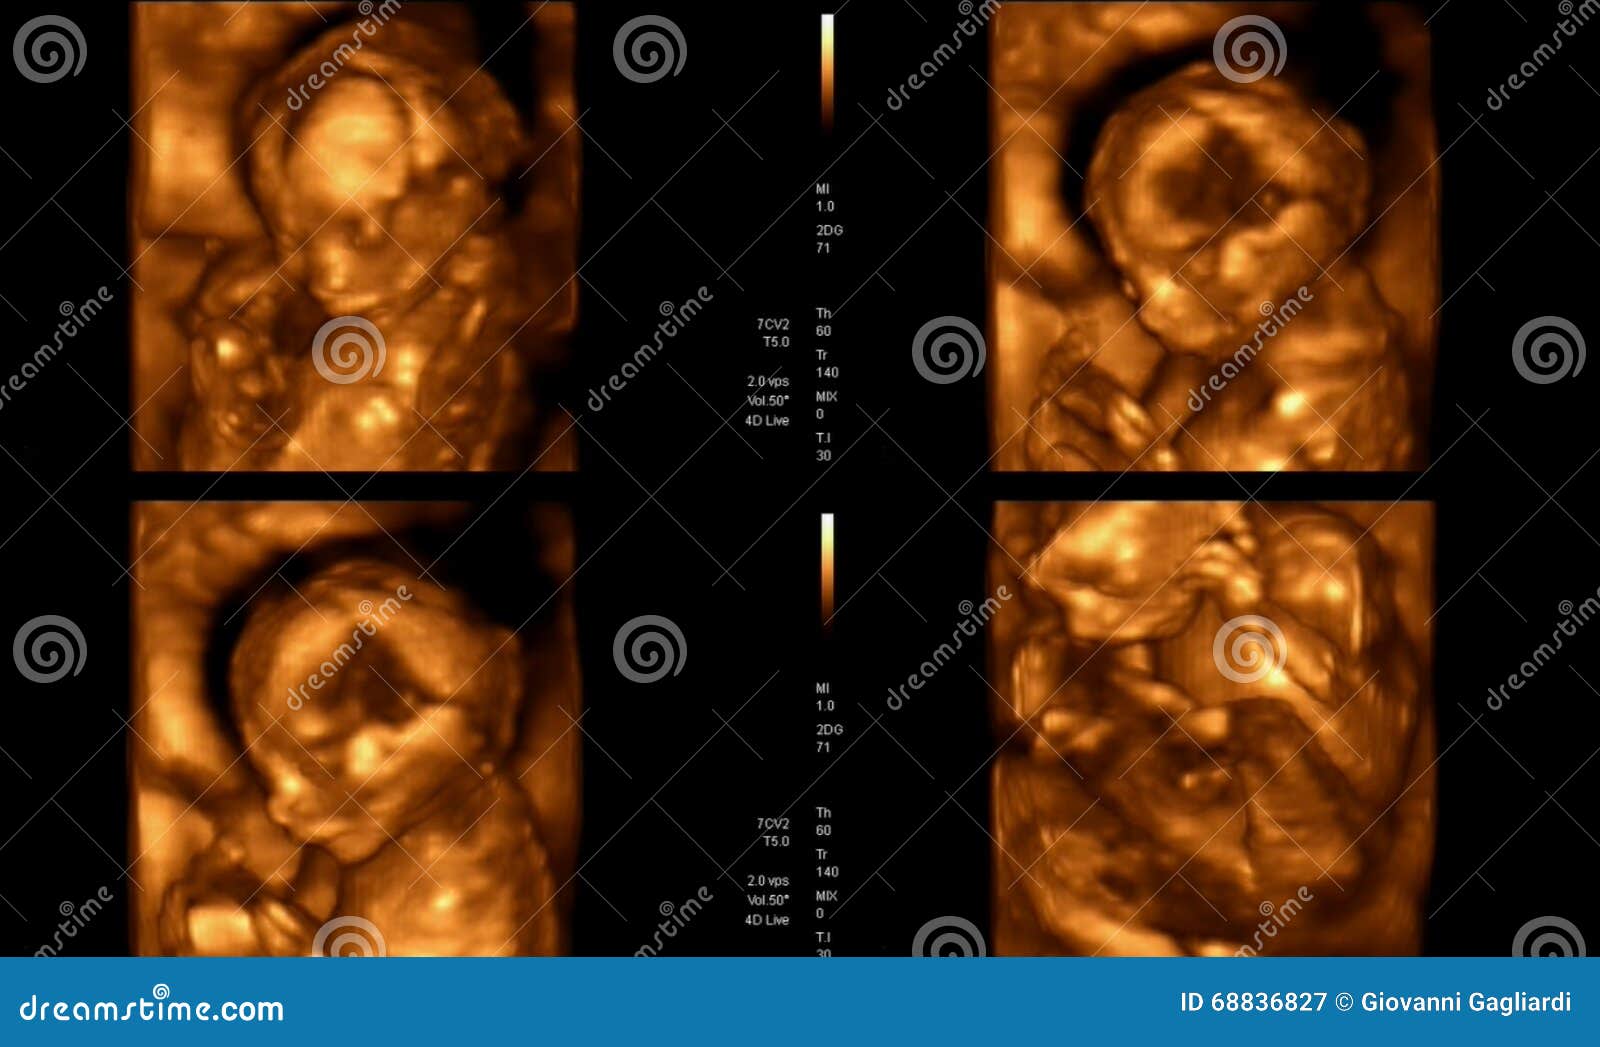 medical images collage of 4d ultrasound during woman pregnancy s